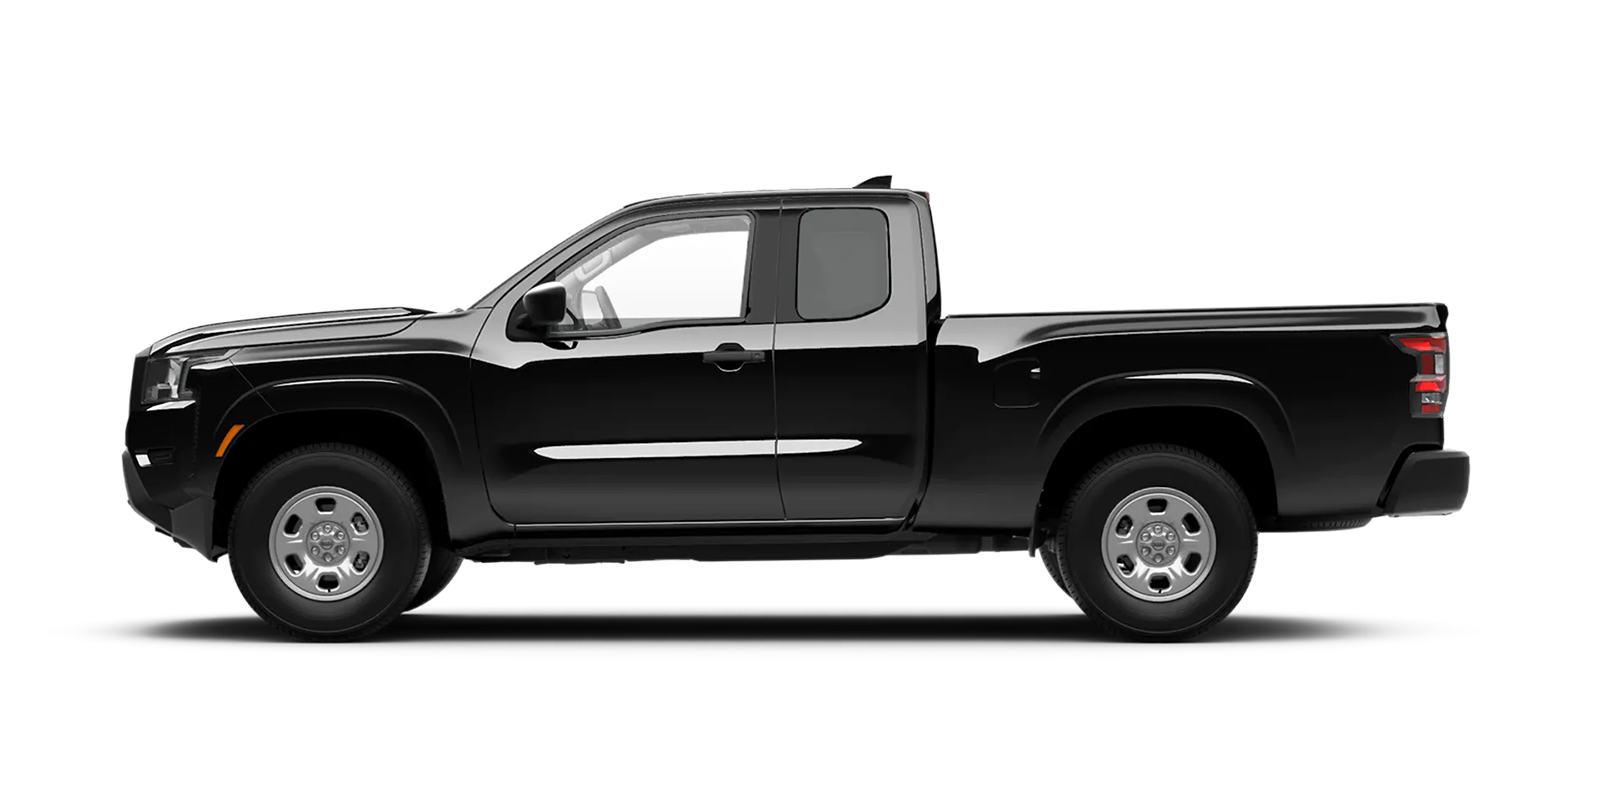 2022 Frontier King Cab S 4x4 in Super Black | Fort Collins Nissan in Fort Collins CO